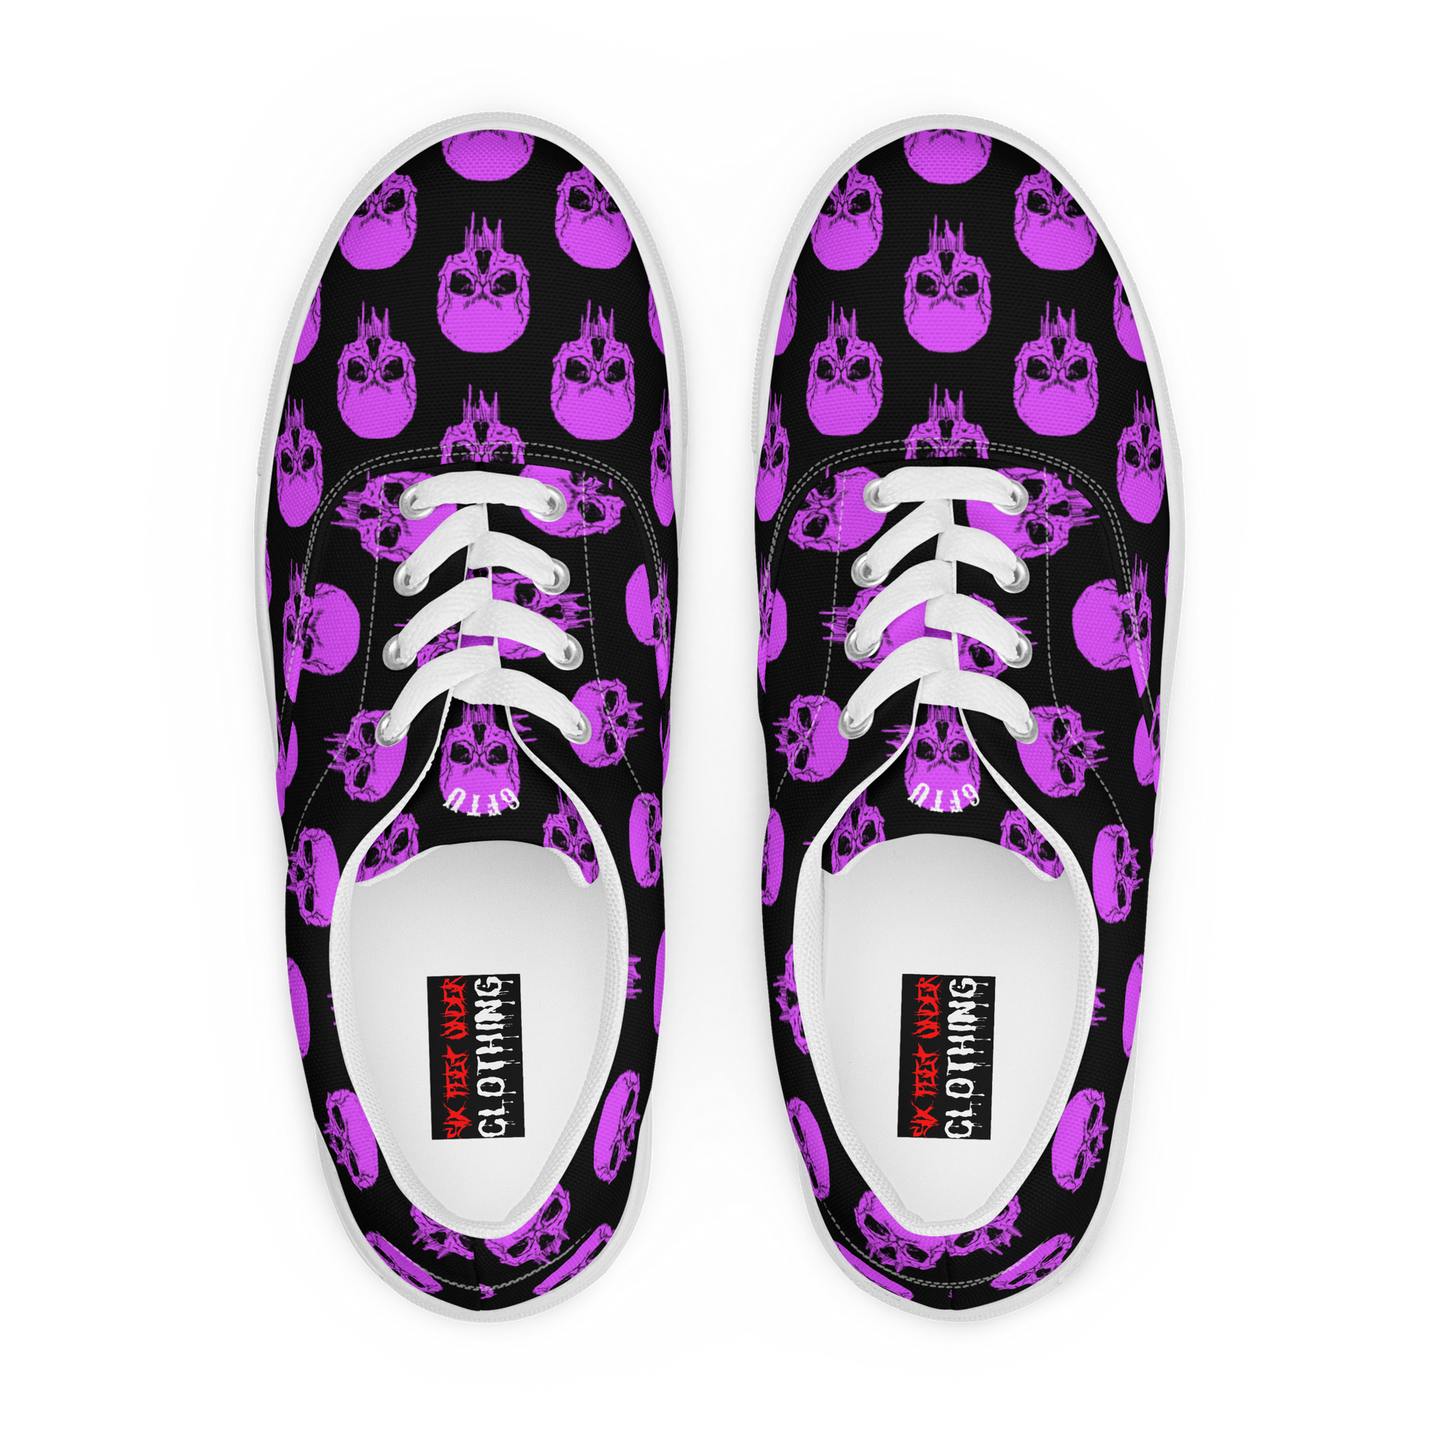 Drippy Skull - Men’s Laced Canvas Shoes